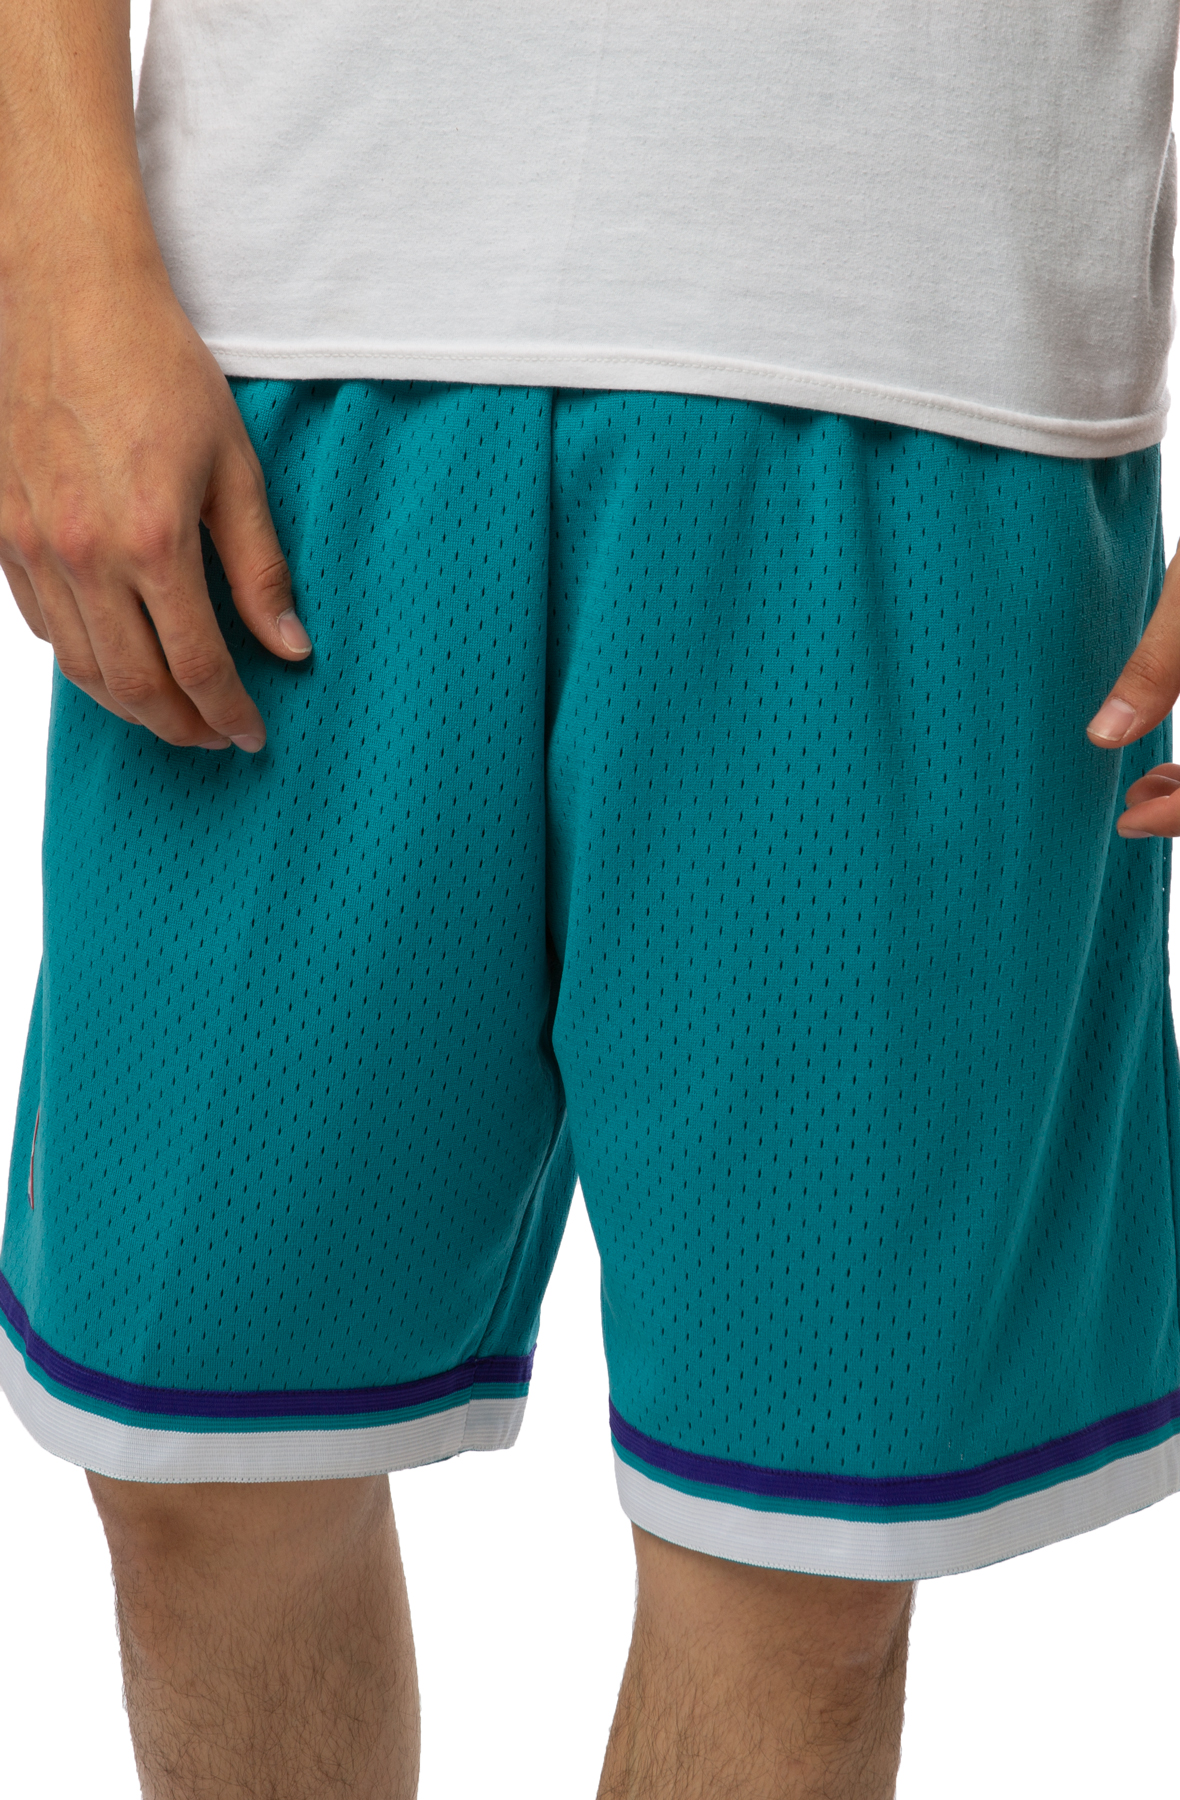  Mitchell & Ness NBA Road Swingman Shorts Hornets 99-00 Teal MD  9 : Sports & Outdoors